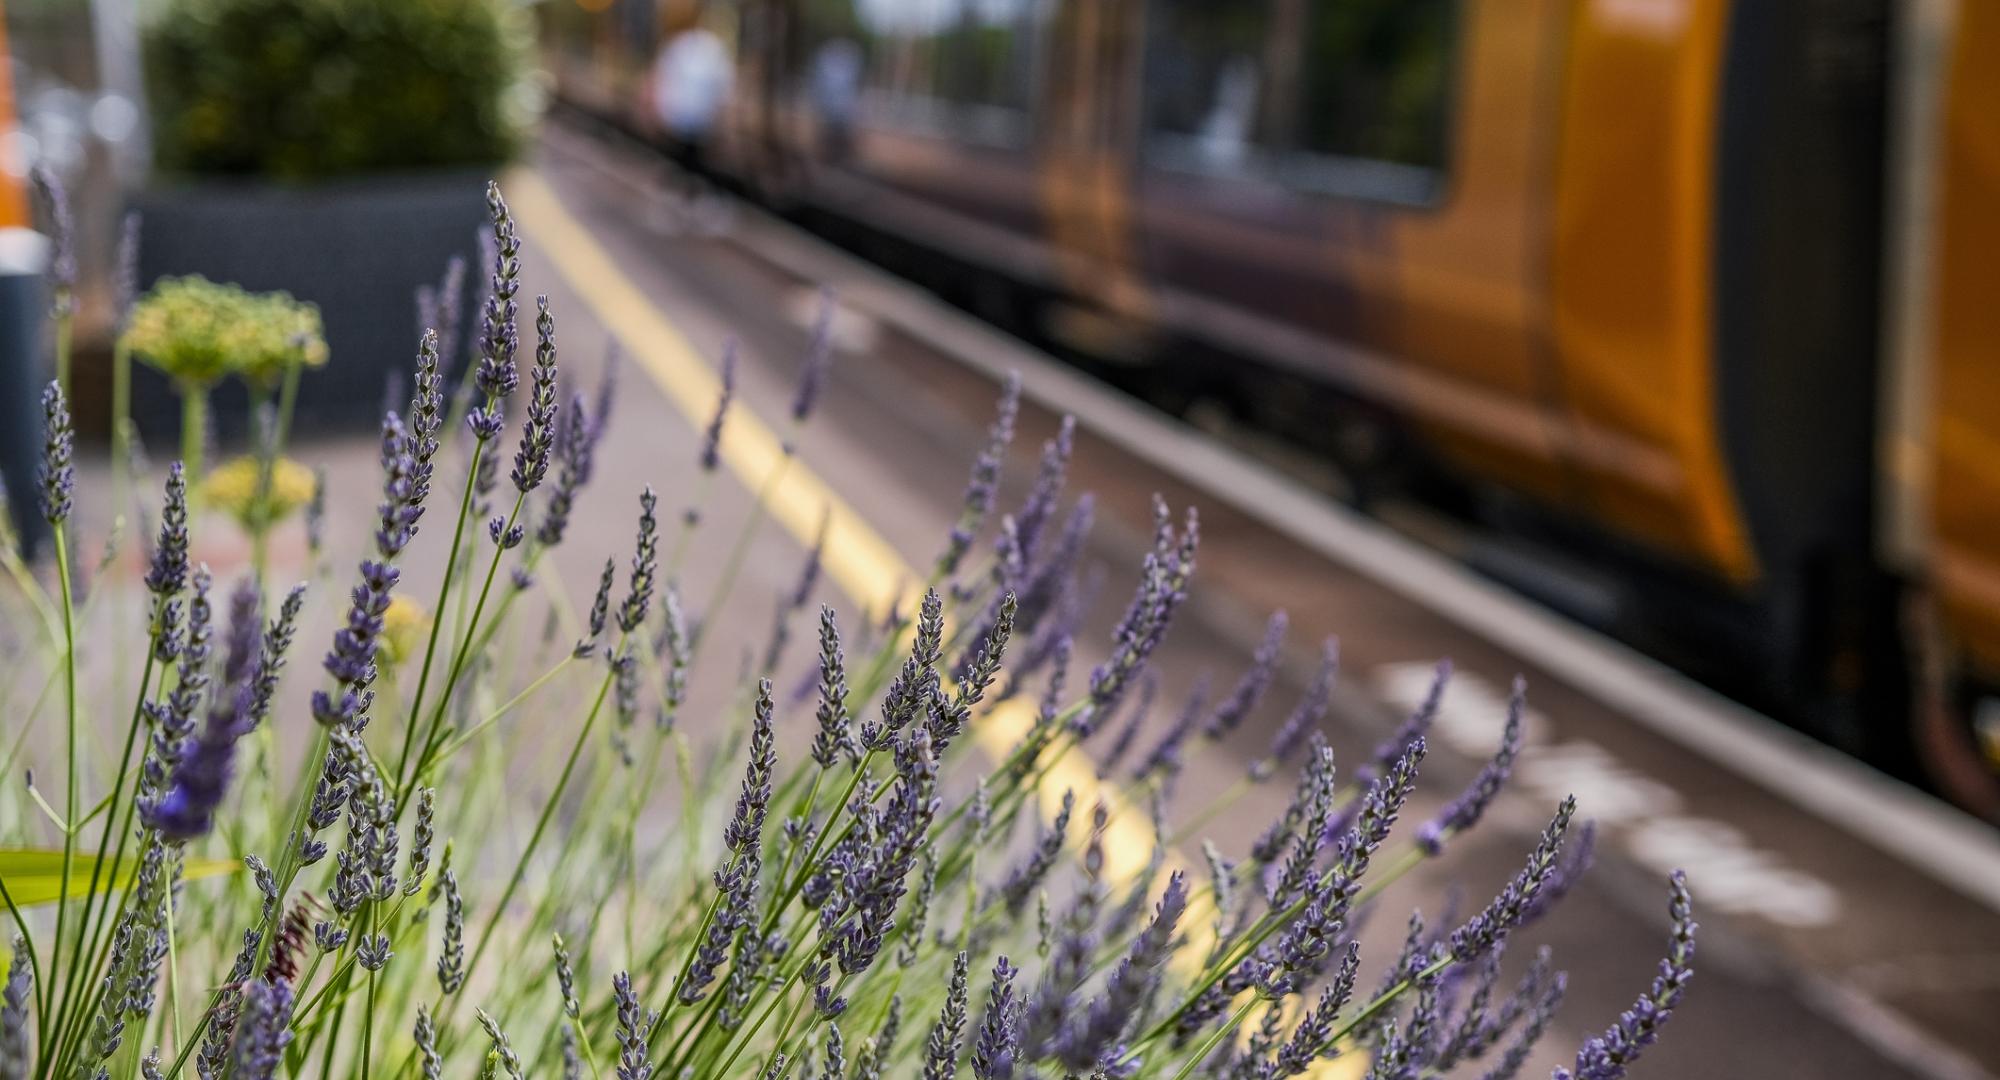 Train stopped at a platform with flower in the foreground